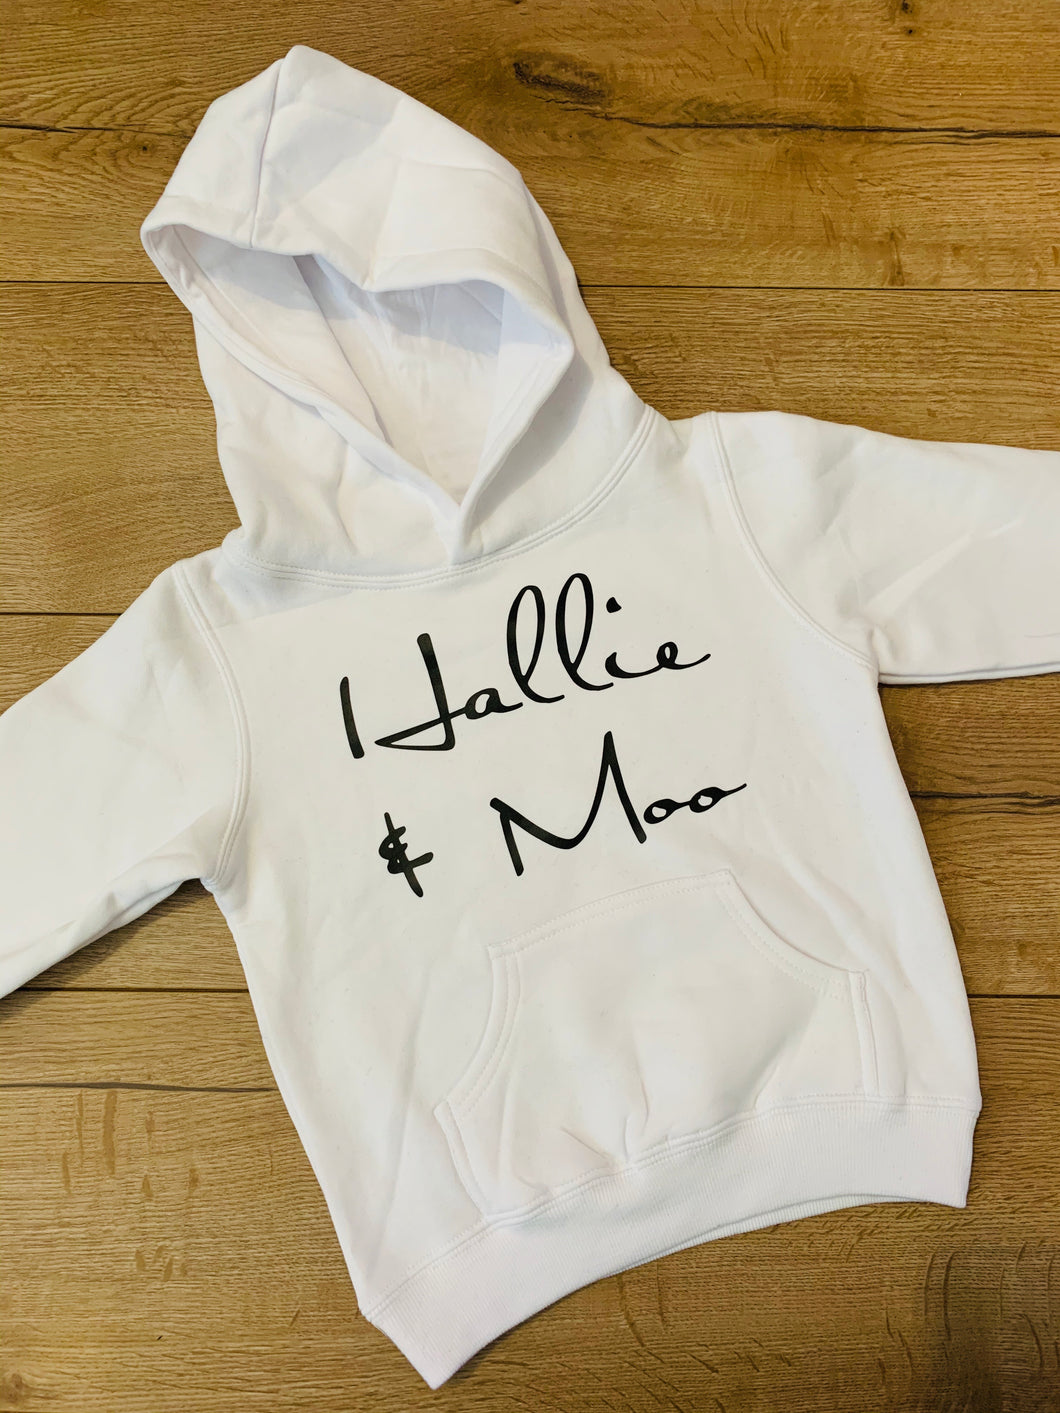 Our new Hallie and Moo mummy and me matching hoodies